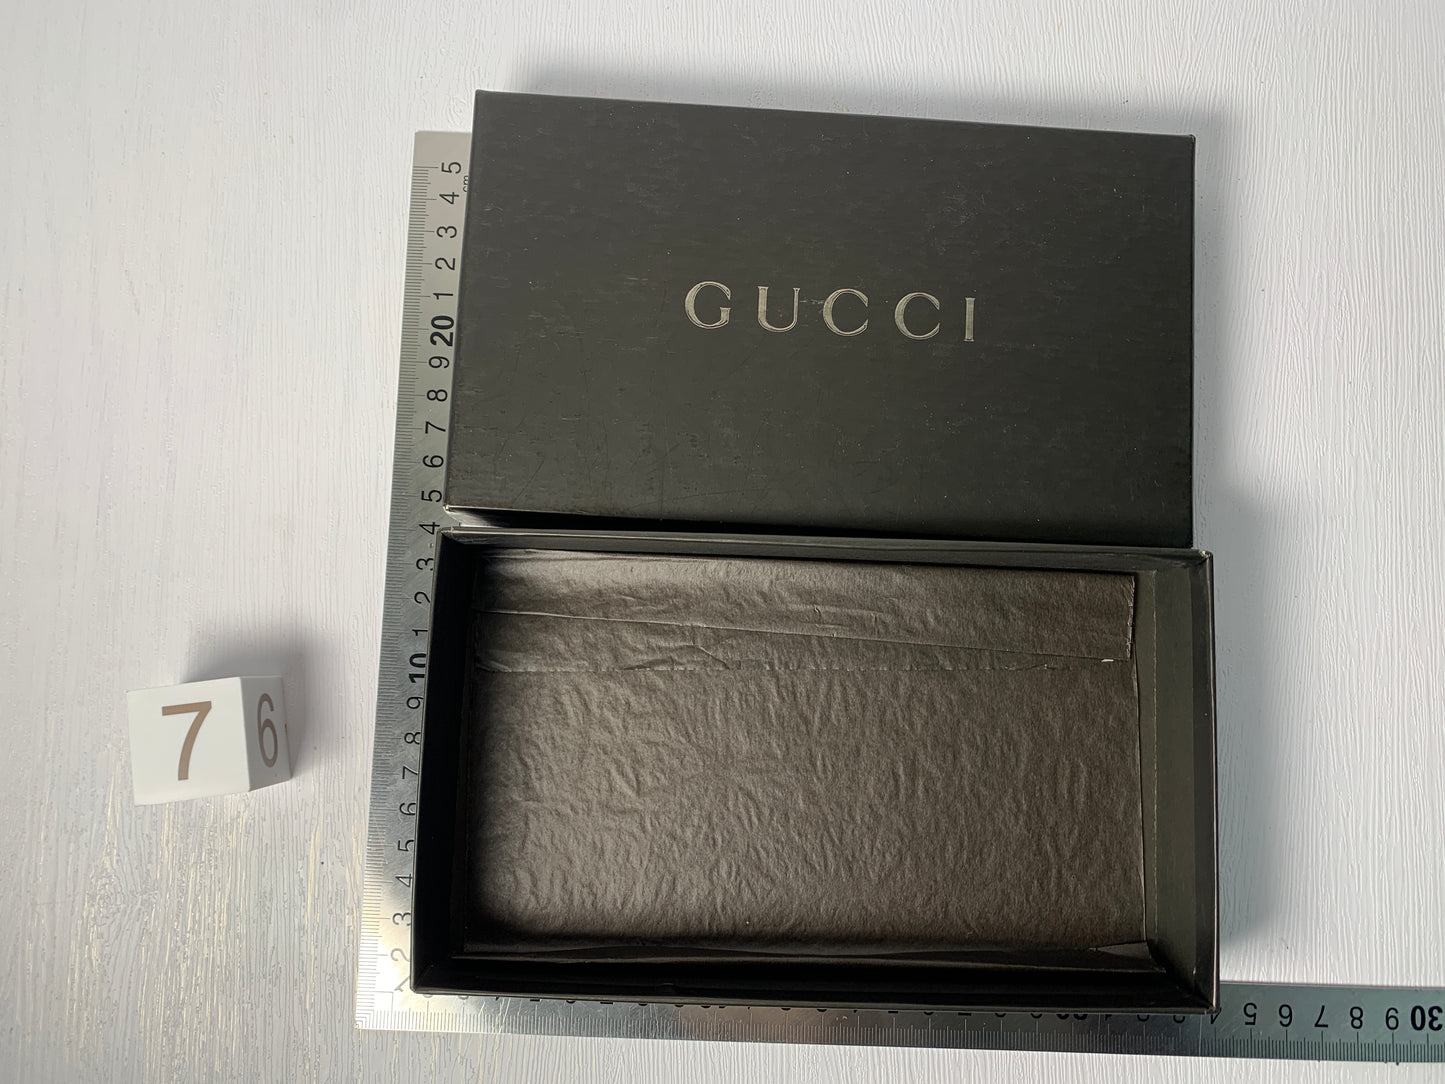 Auth Gucci Box gift for watch wallet jewllery necklace bracelet  - 30JAN1